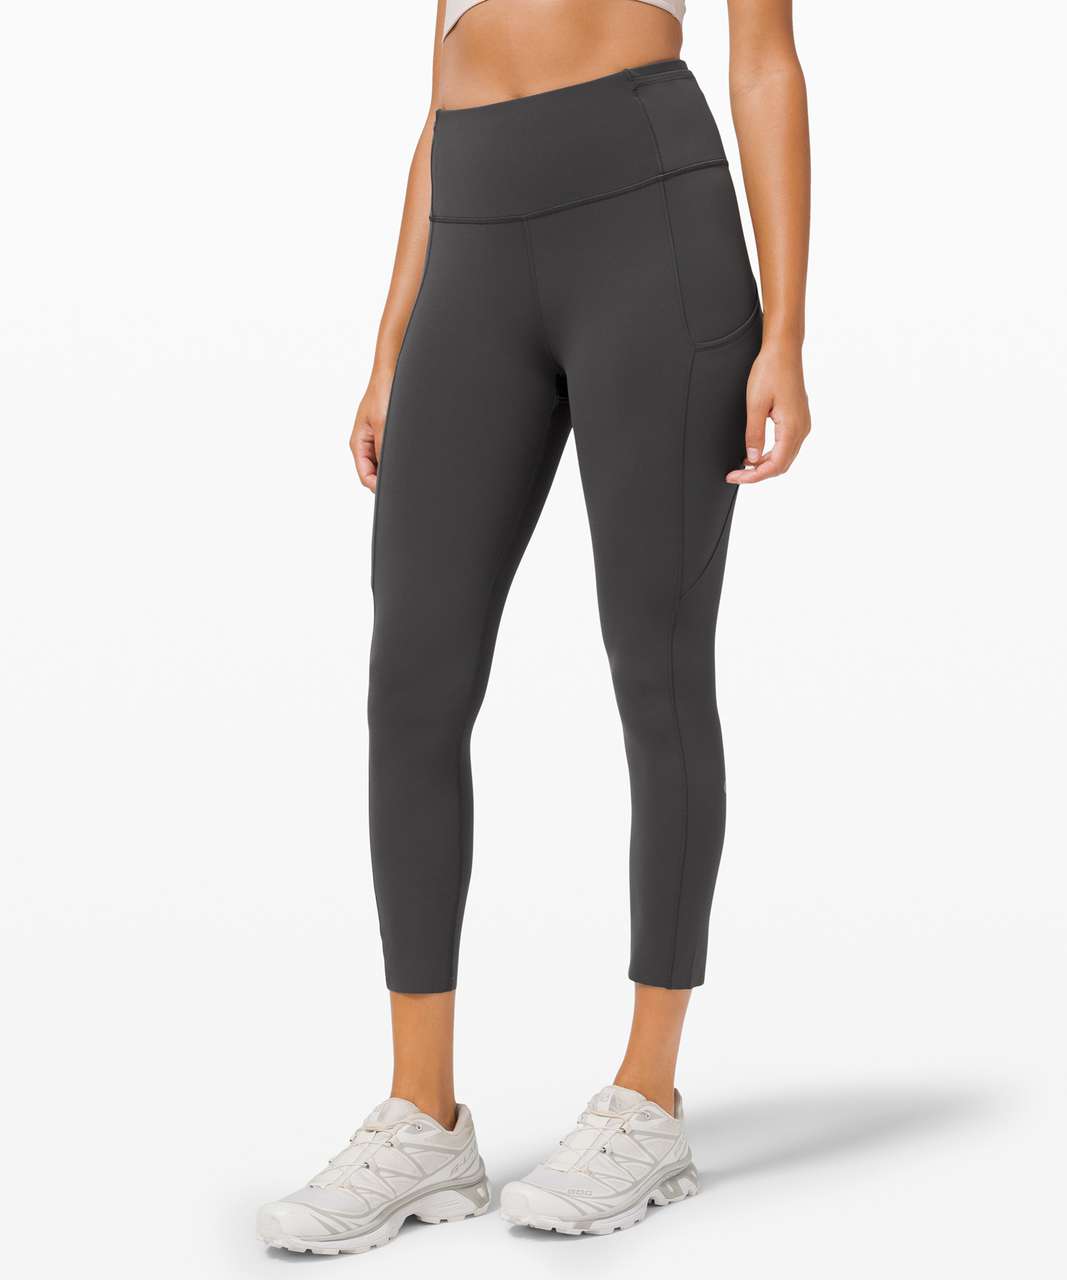 Lululemon Fast and Free High-Rise Crop II 23" *Non-Reflective - Graphite Grey